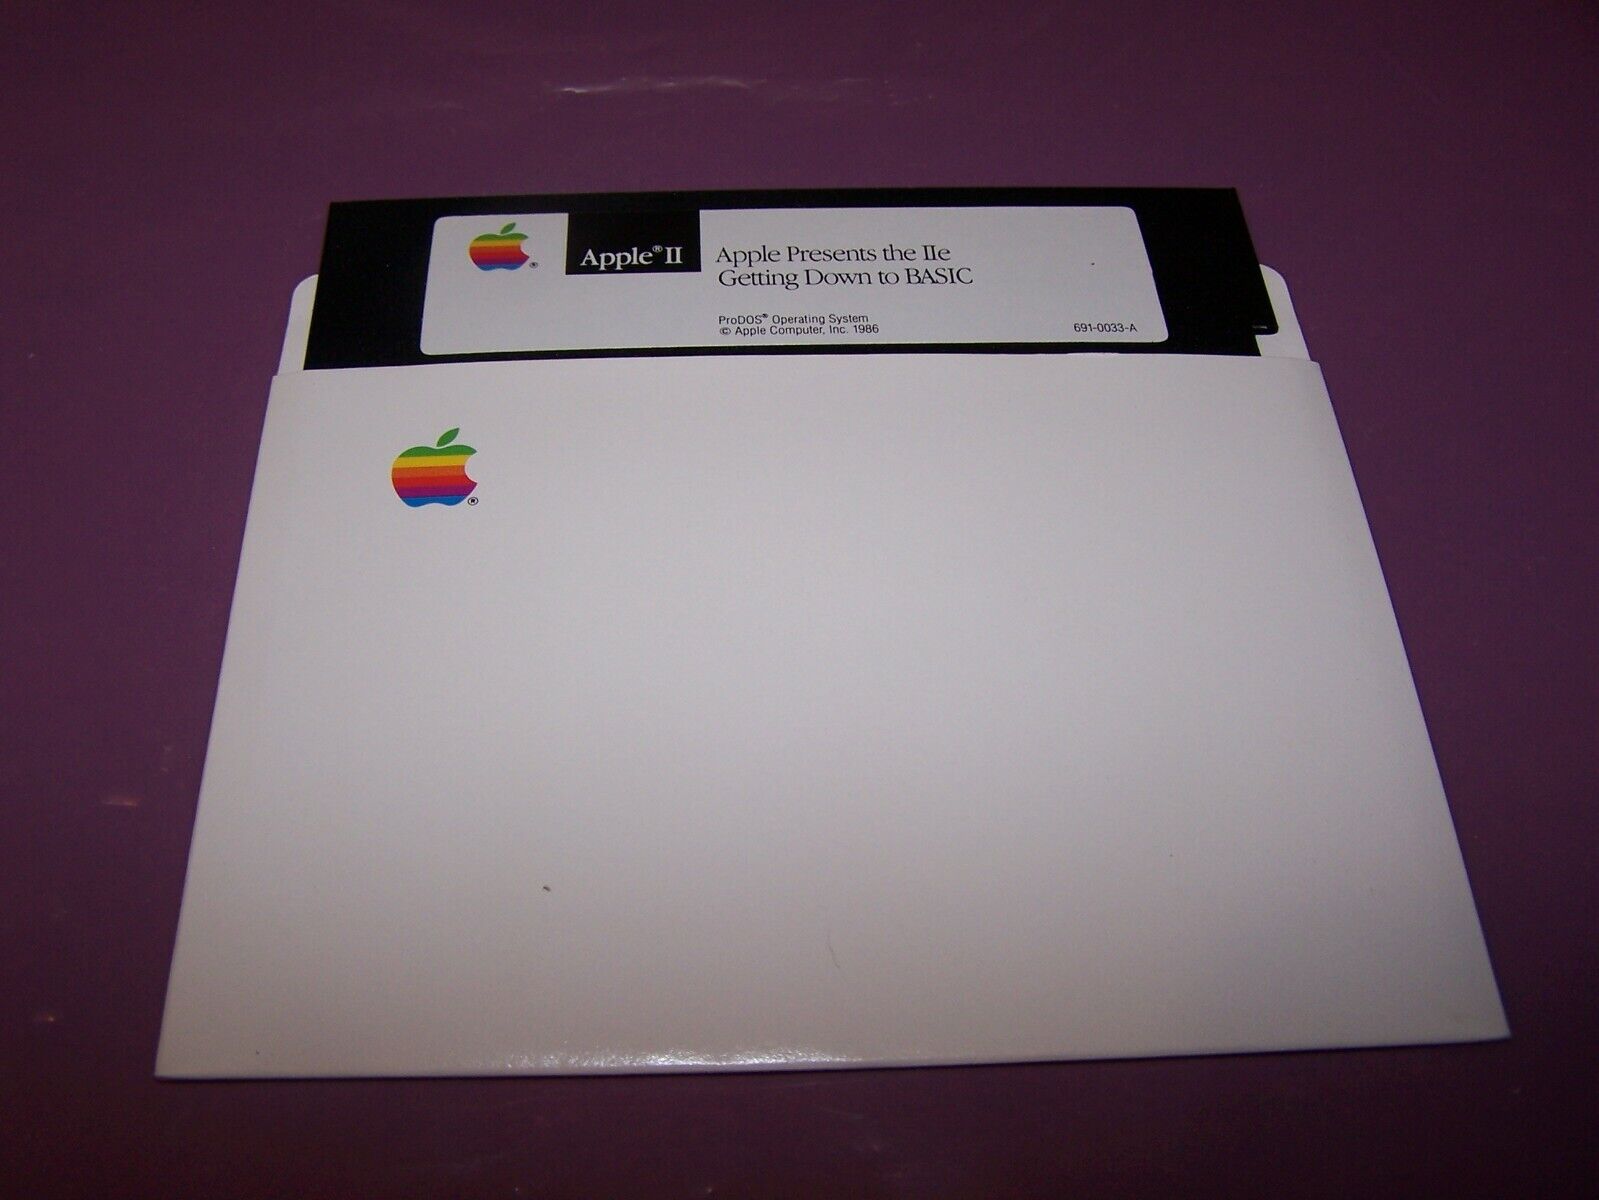 Apple Presents The IIe Getting Down To BASIC  P/N 091-00333-A